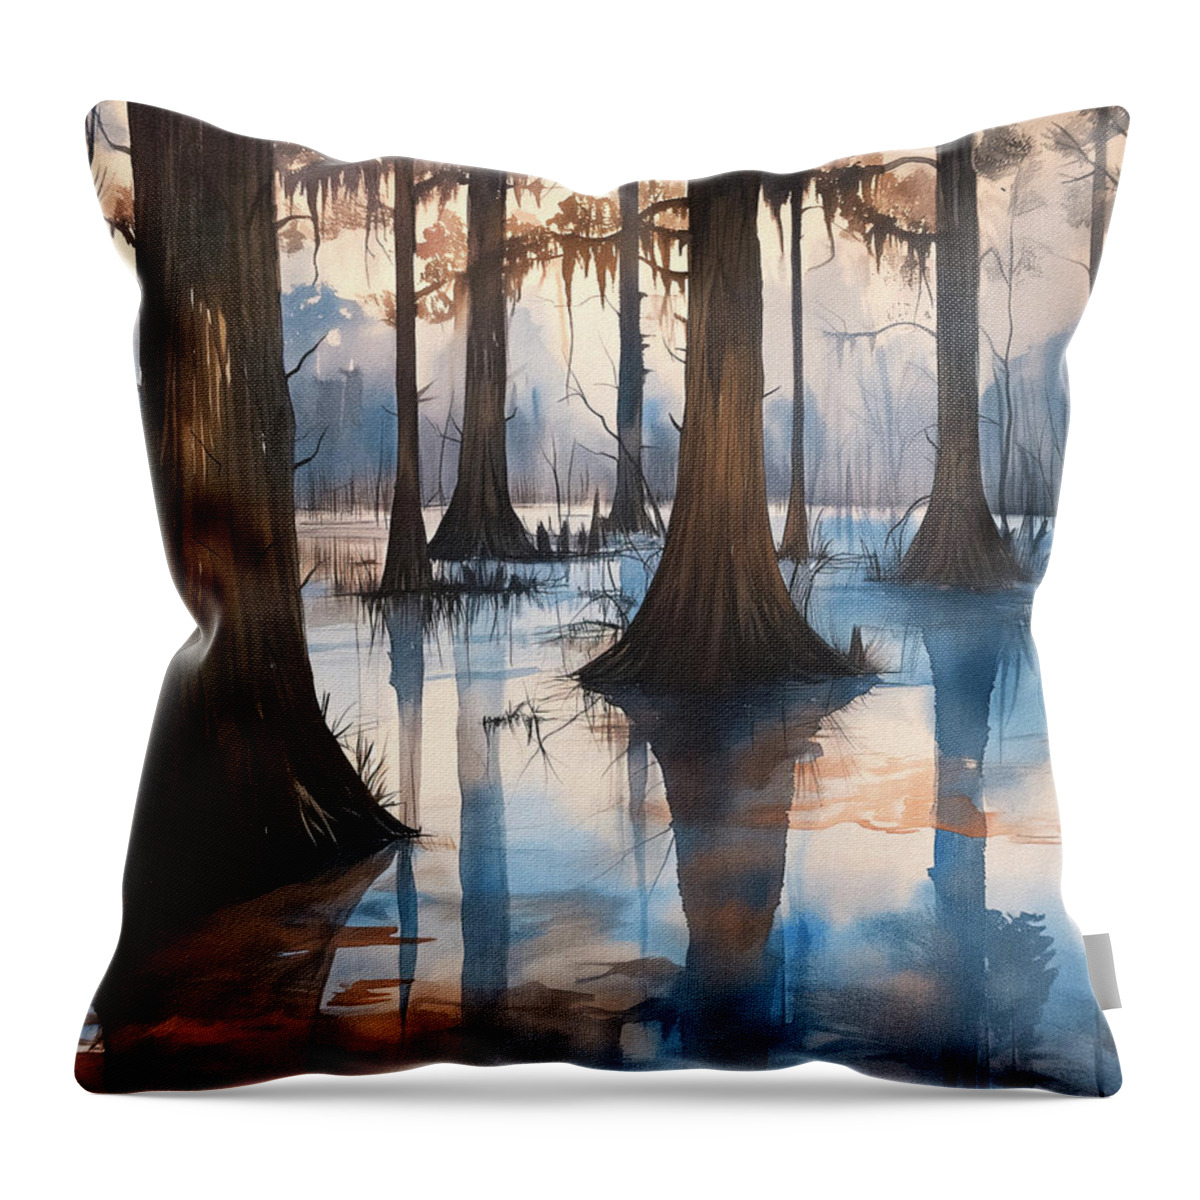 Georgia Throw Pillow featuring the digital art State of Solitude by Mark Tisdale